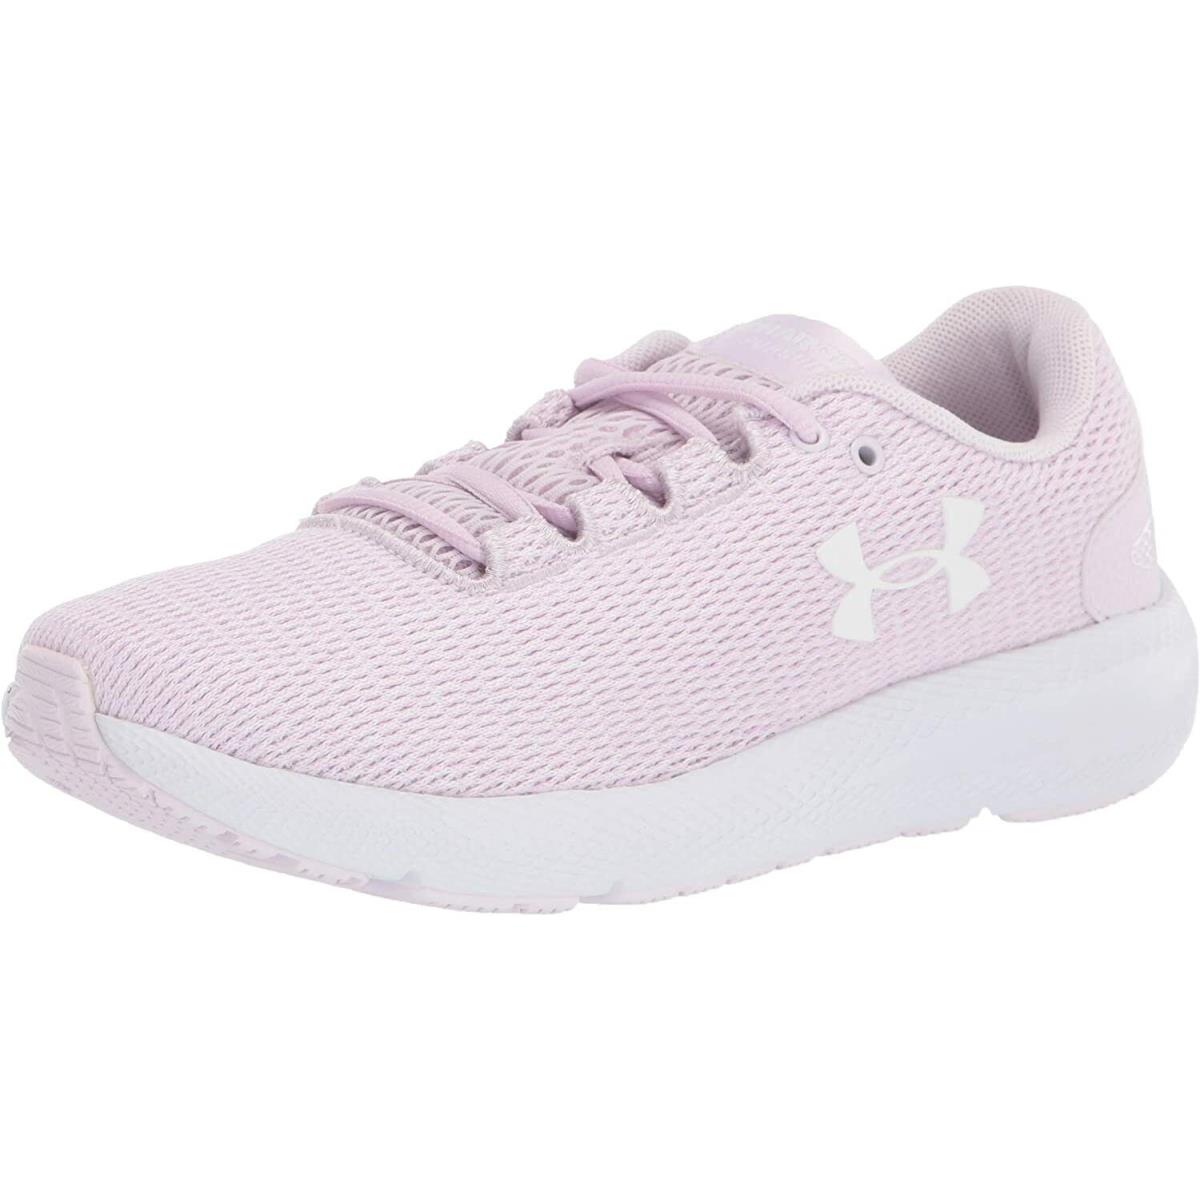 Under Armour Women`s Charged Pursuit 2 Twist Running Shoes 10.5